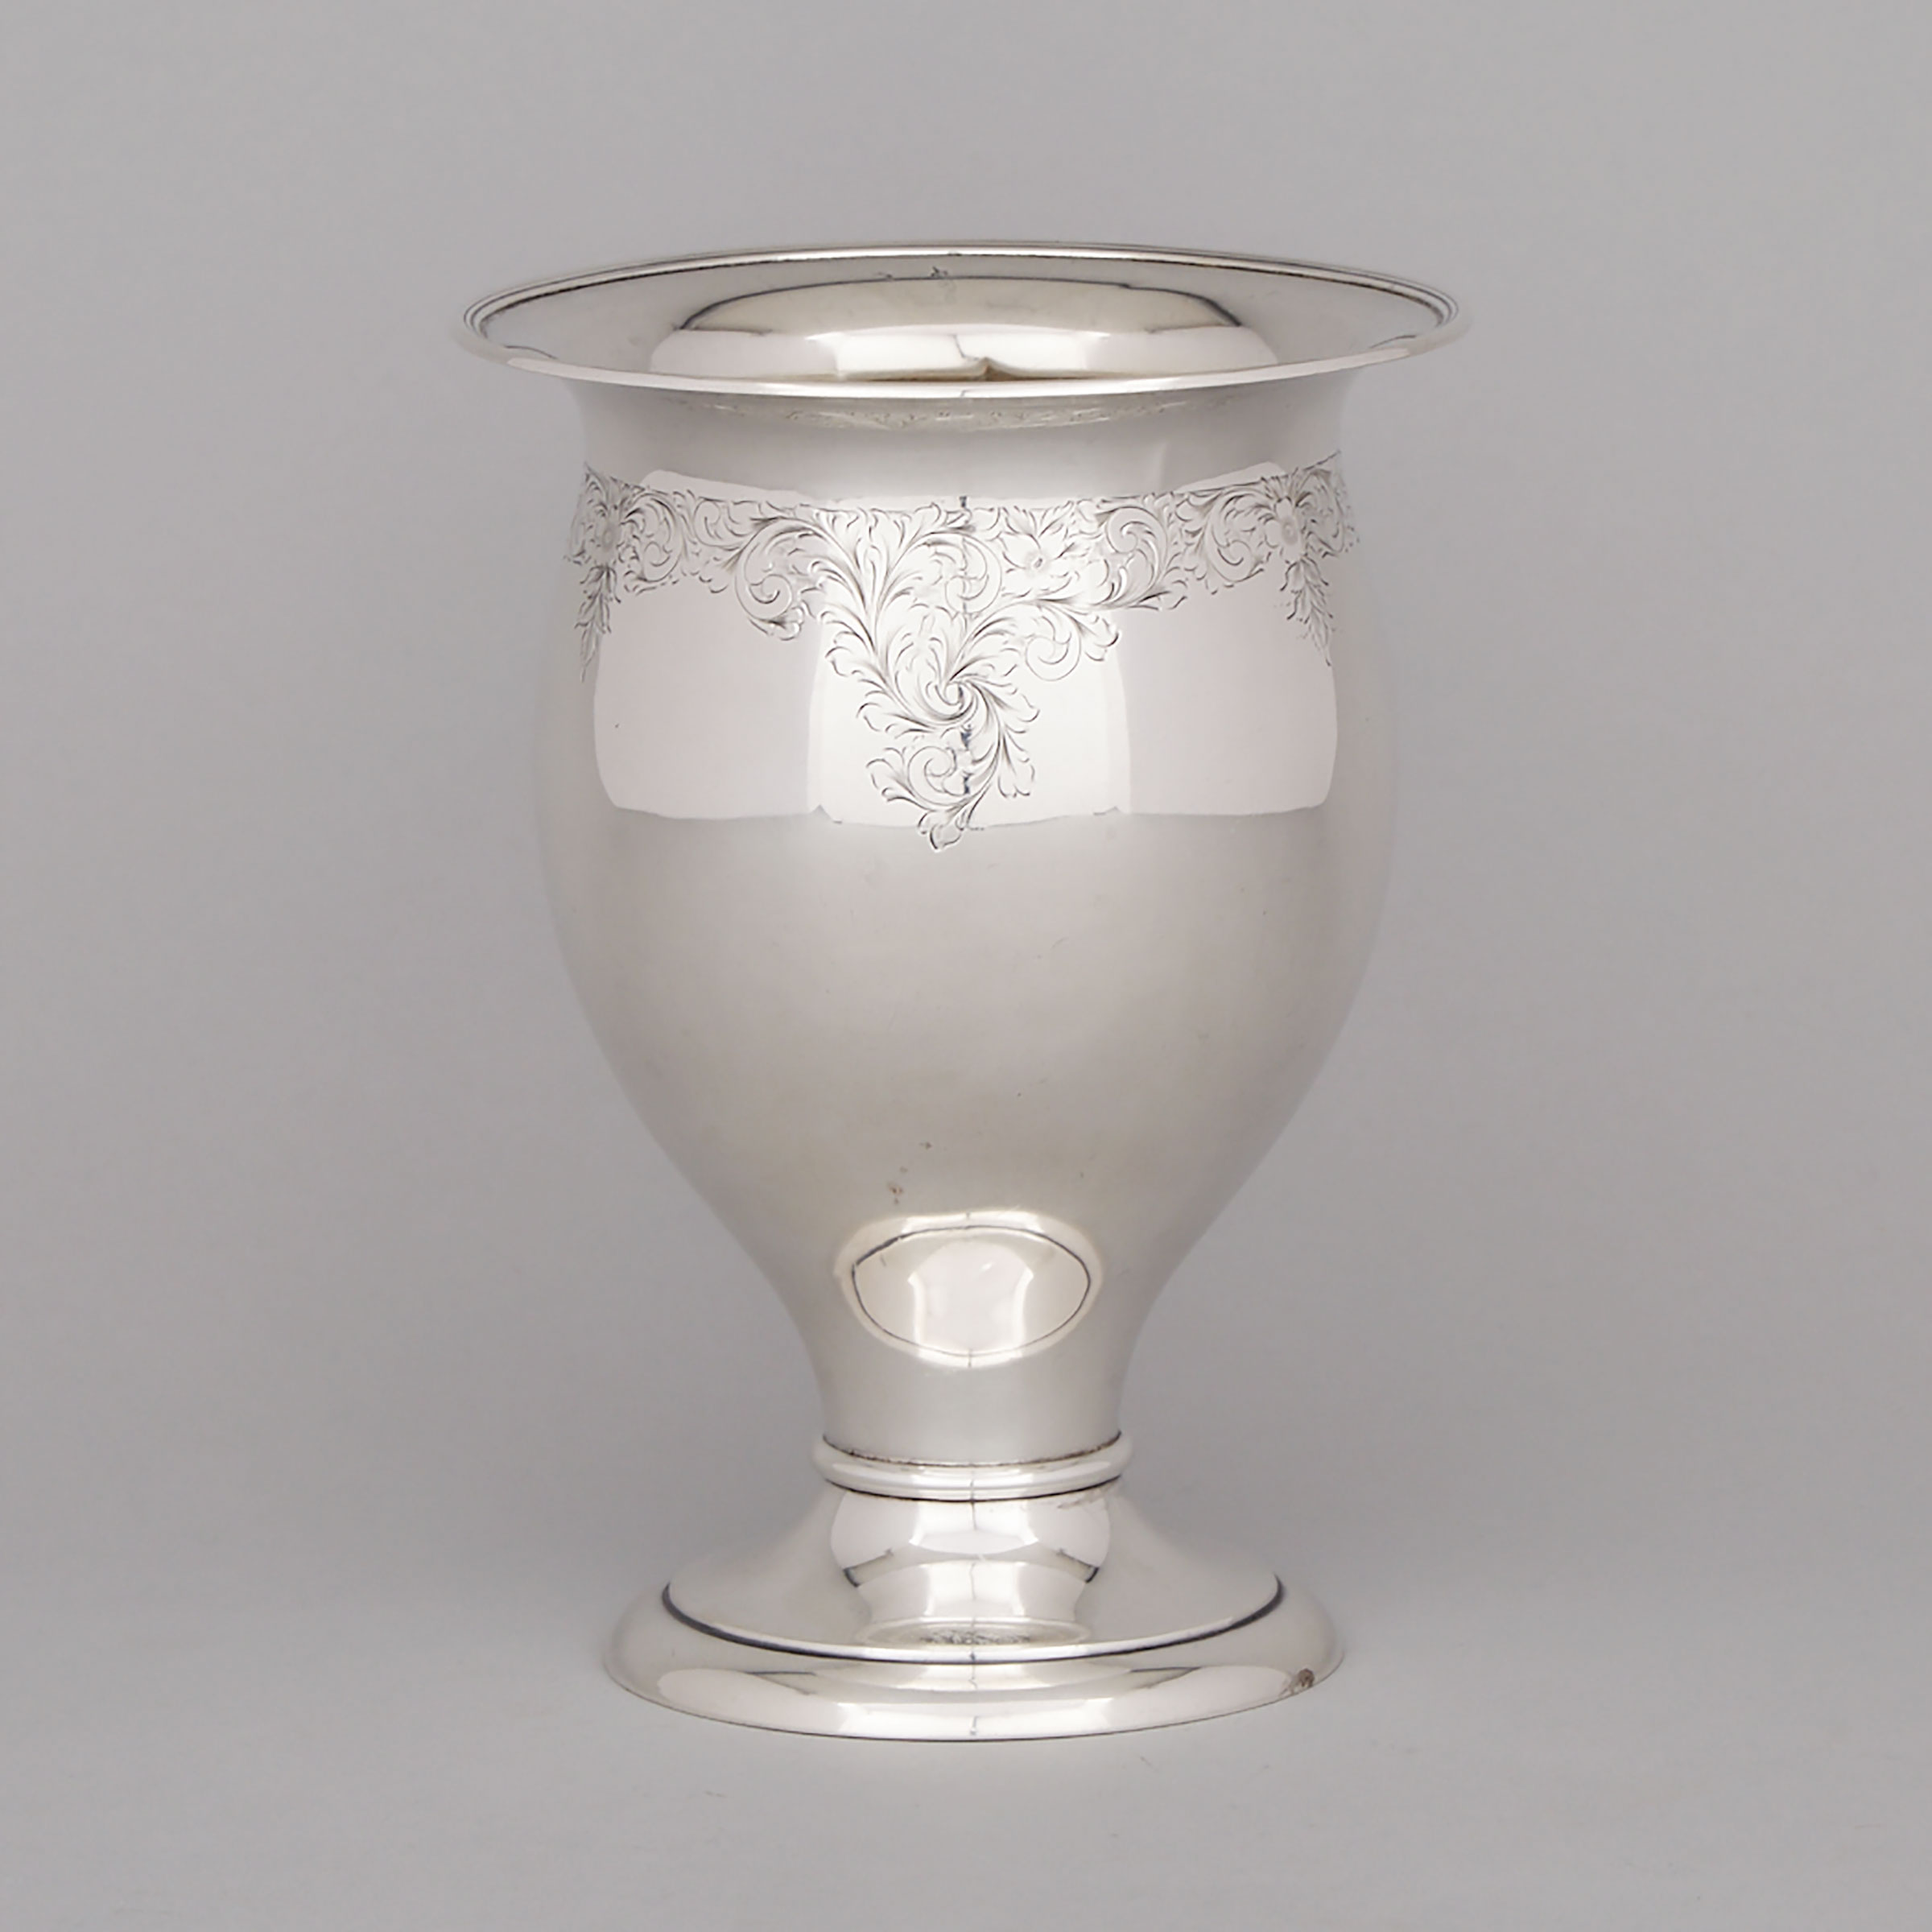 Canadian Silver Vase, Henry Birks & Sons, Montreal, Que., 1904-24